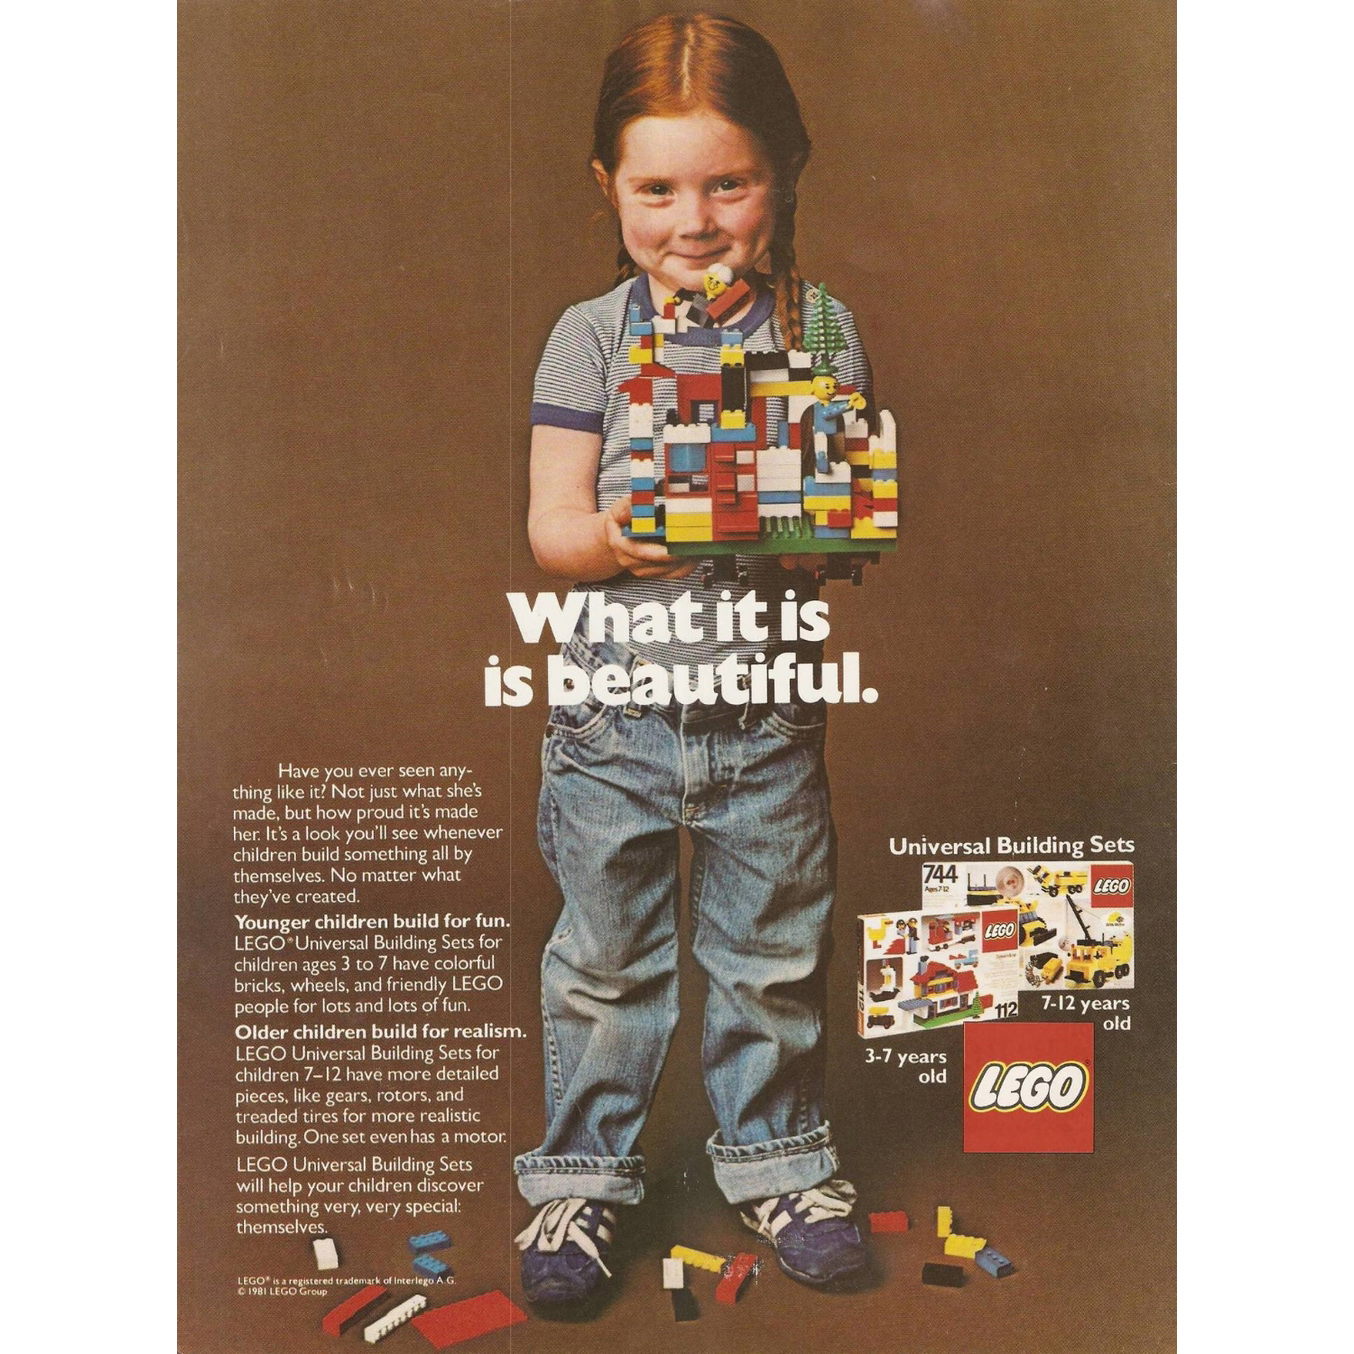 LEGO Marketing Materials From the 1960s-1980s Encouraged Boys and Girls to Build Together Flashbak